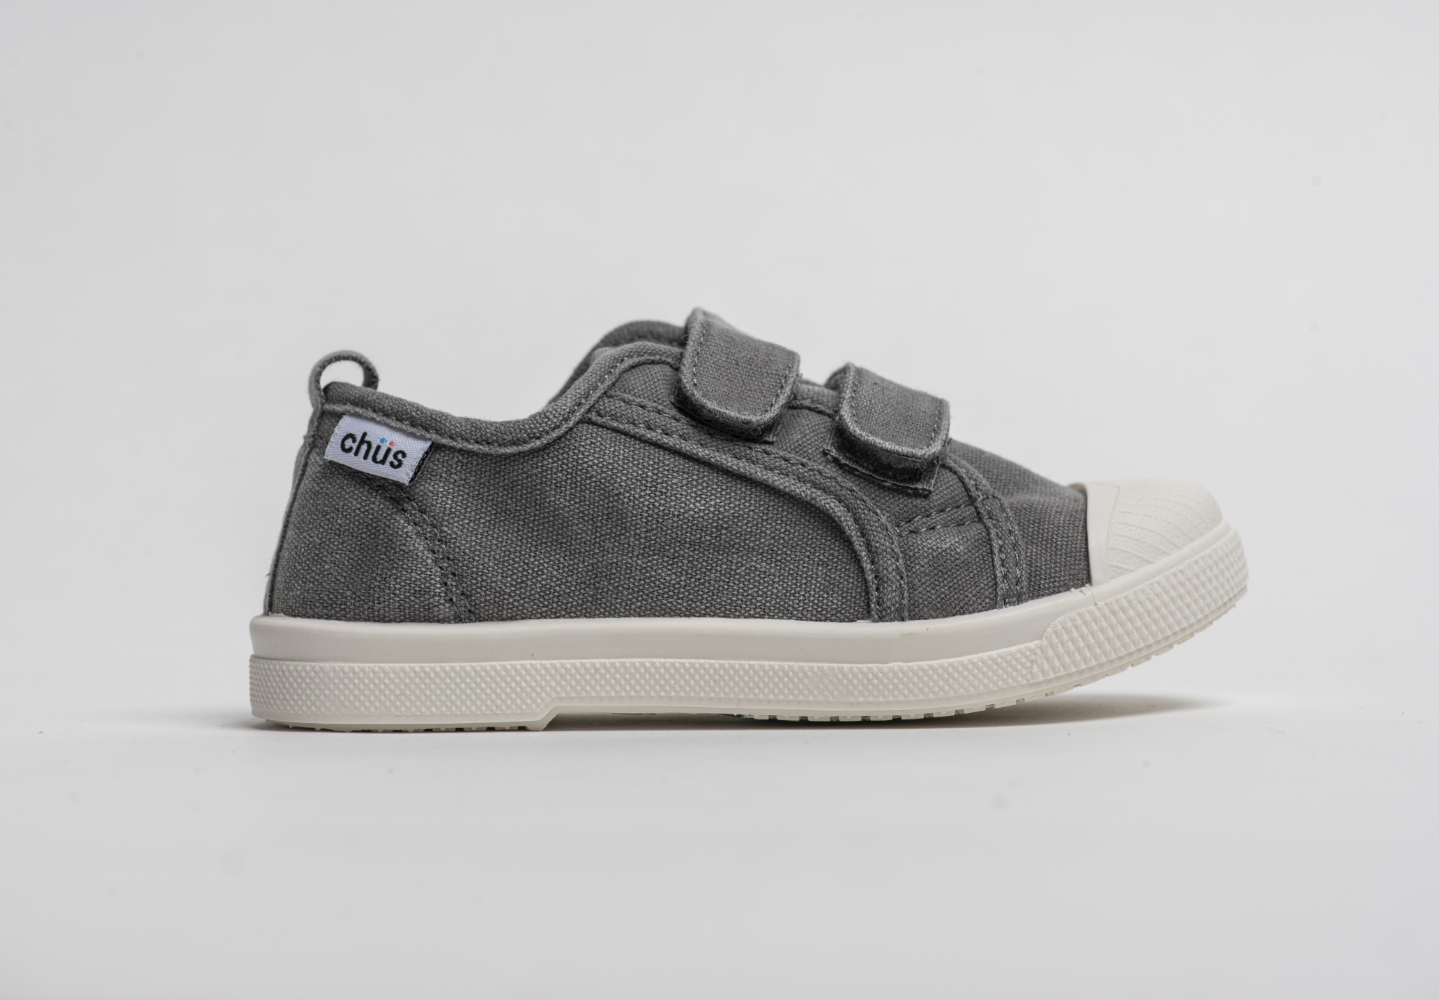 Distressed grey canvas sneakers with double velcro straps. Chus Shoes.